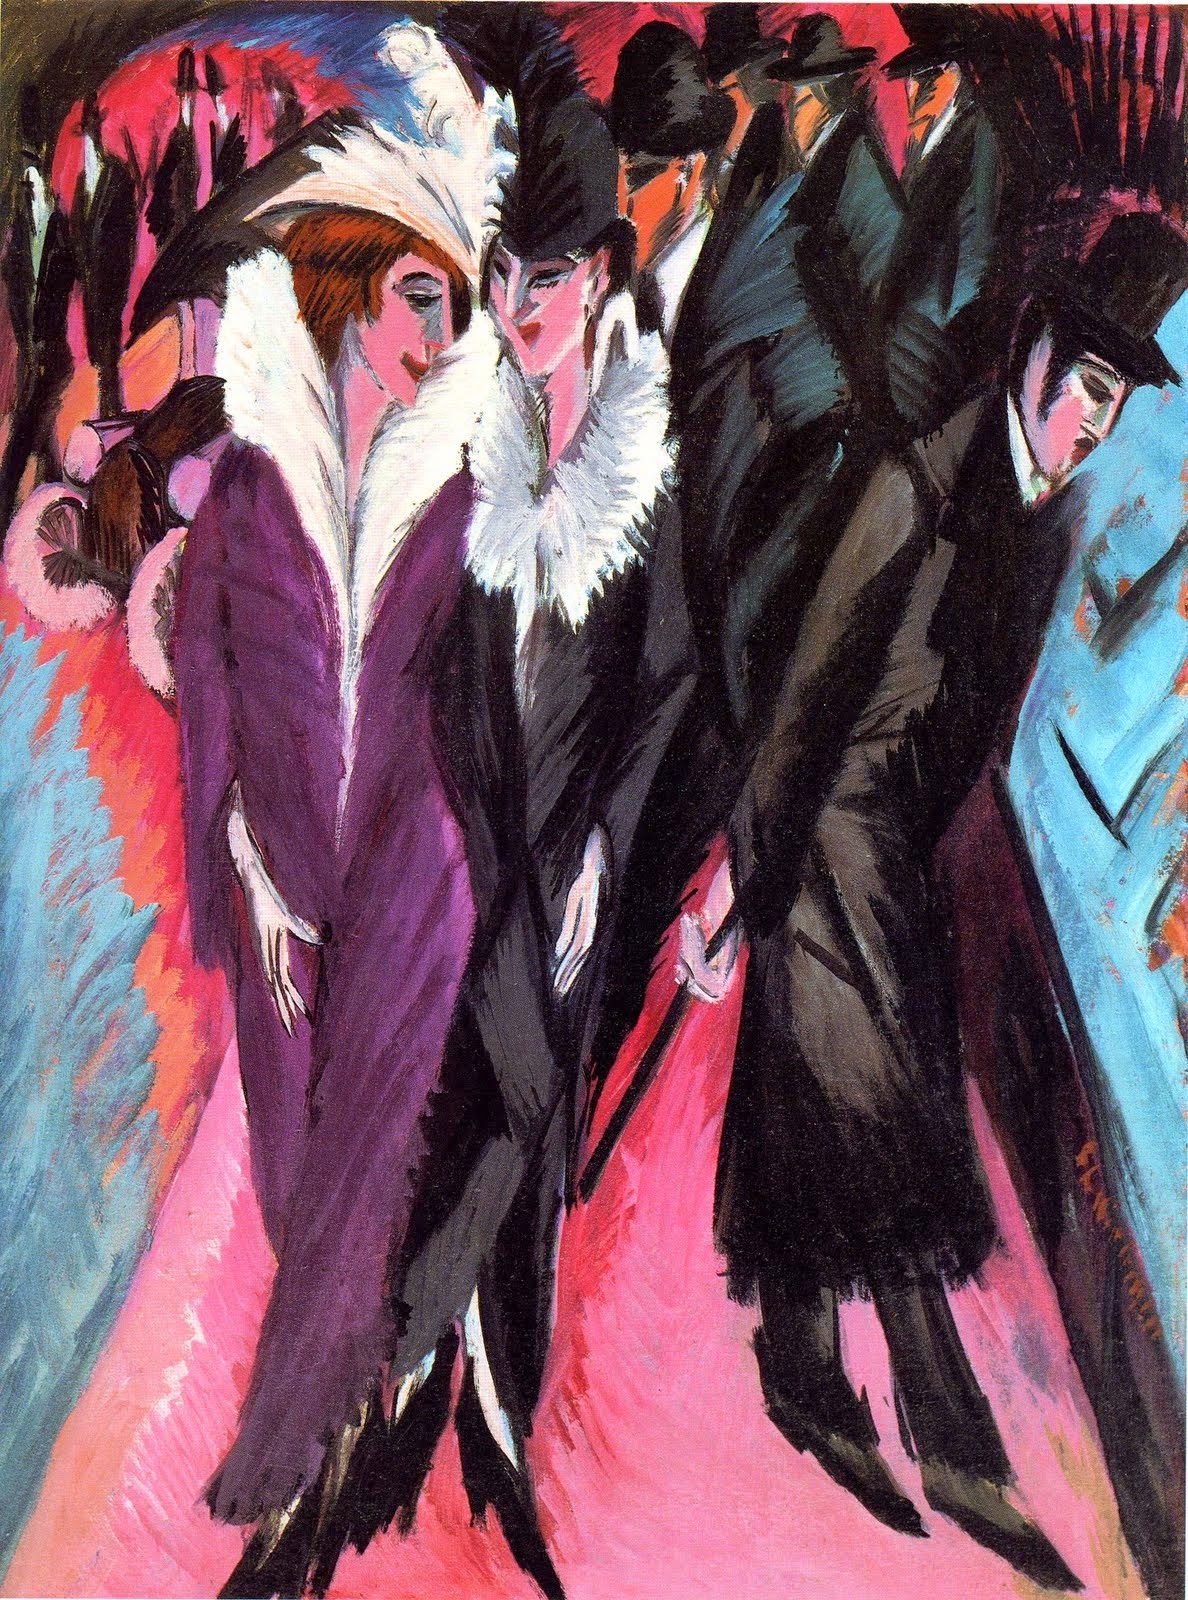 STREET, BERLIN, Painting by Ernst Ludwig Kirchner (1913